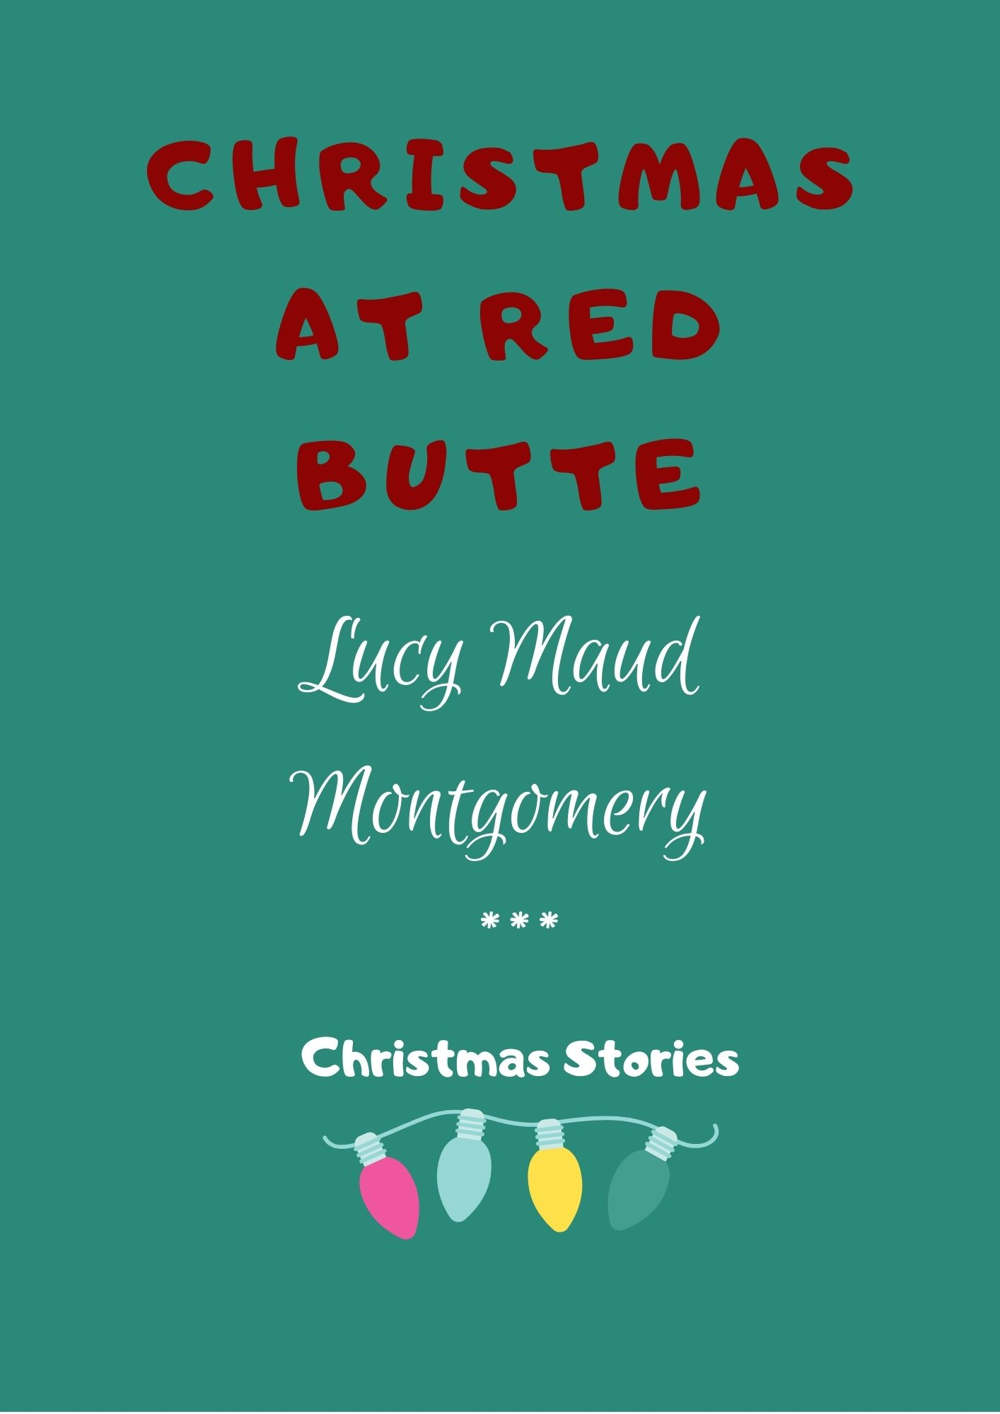 Christmas at Red Butte by Lucy Maud Montgomery